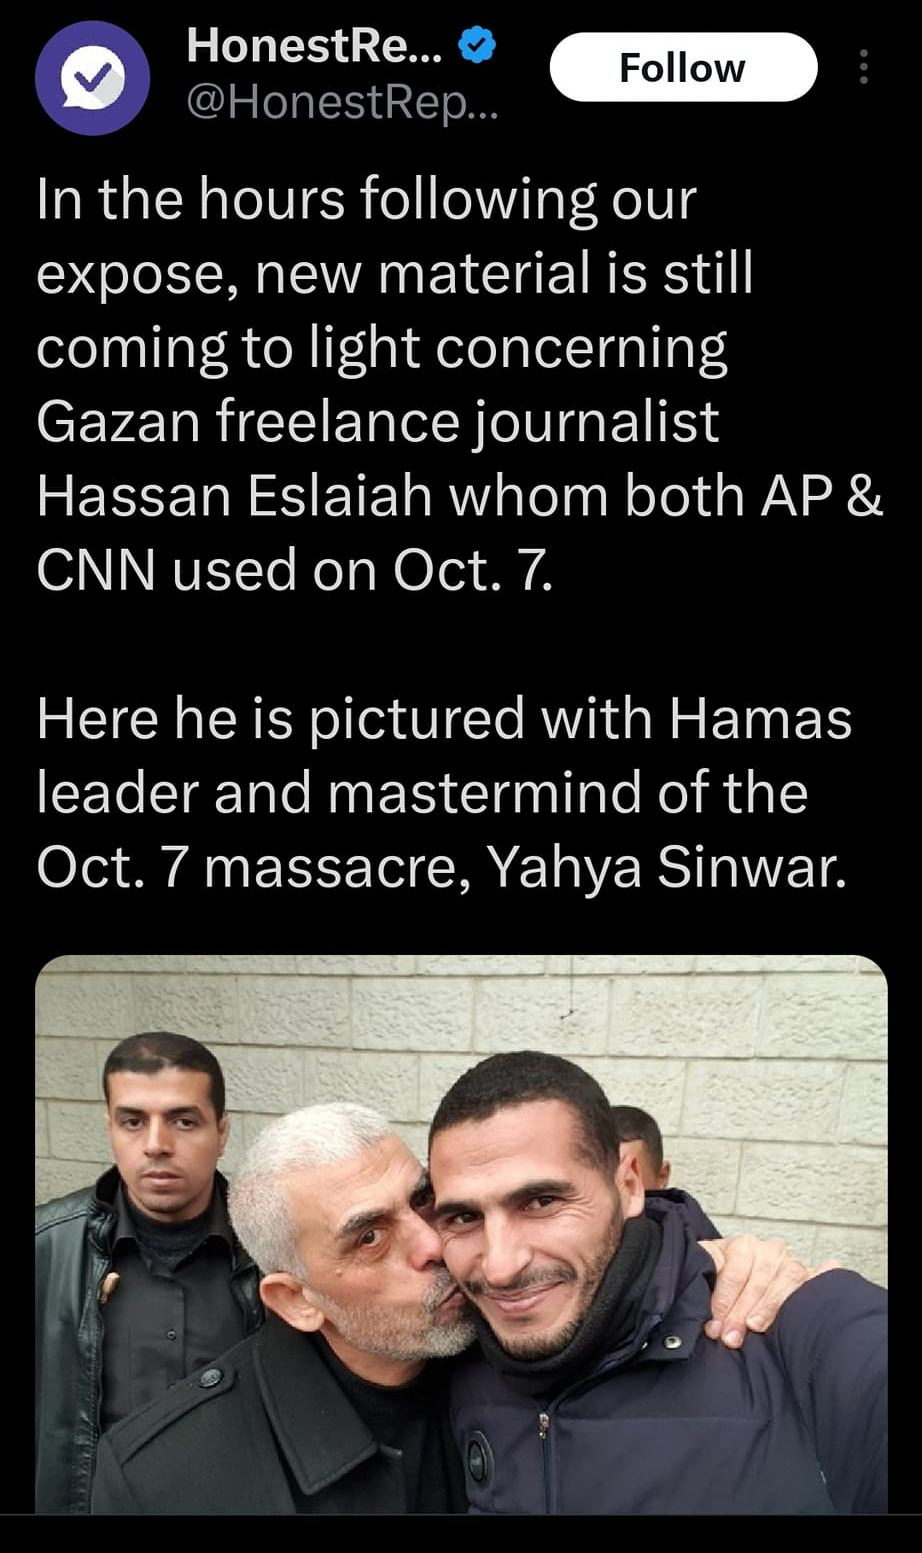 May be an image of 3 people and text that says '3:47 4G 100% Post HonestRe... HonestRep. Follow In the hours following our expose, new material is still coming to light concerning Gazan freelance journalist Hassan Eslaiah whom both AP CNN used on Oct.7. Here he is pictured with Hamas leader and mastermind of the Oct. 7 massacre, Yahya Sinwar. Û rep Post your |||'